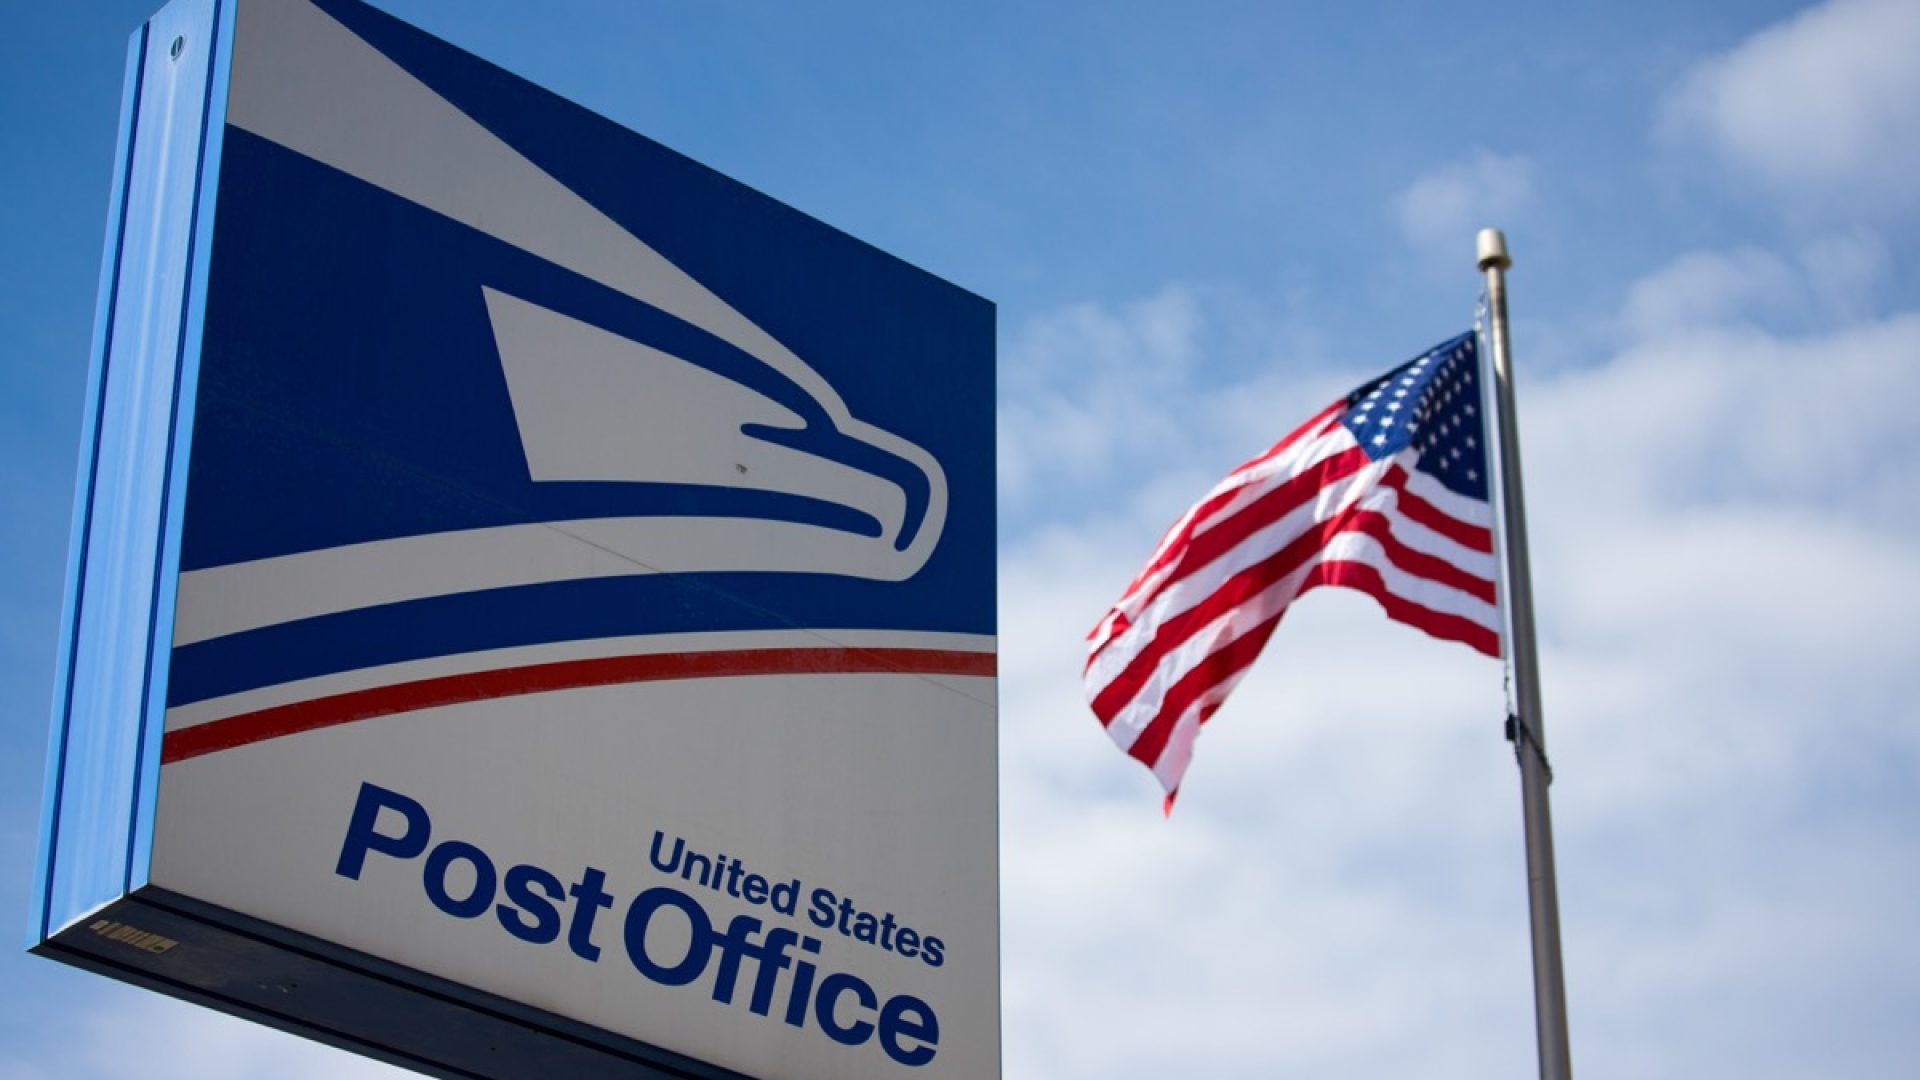 USPS Is Suspending Services Here "Due to Safety Concerns"